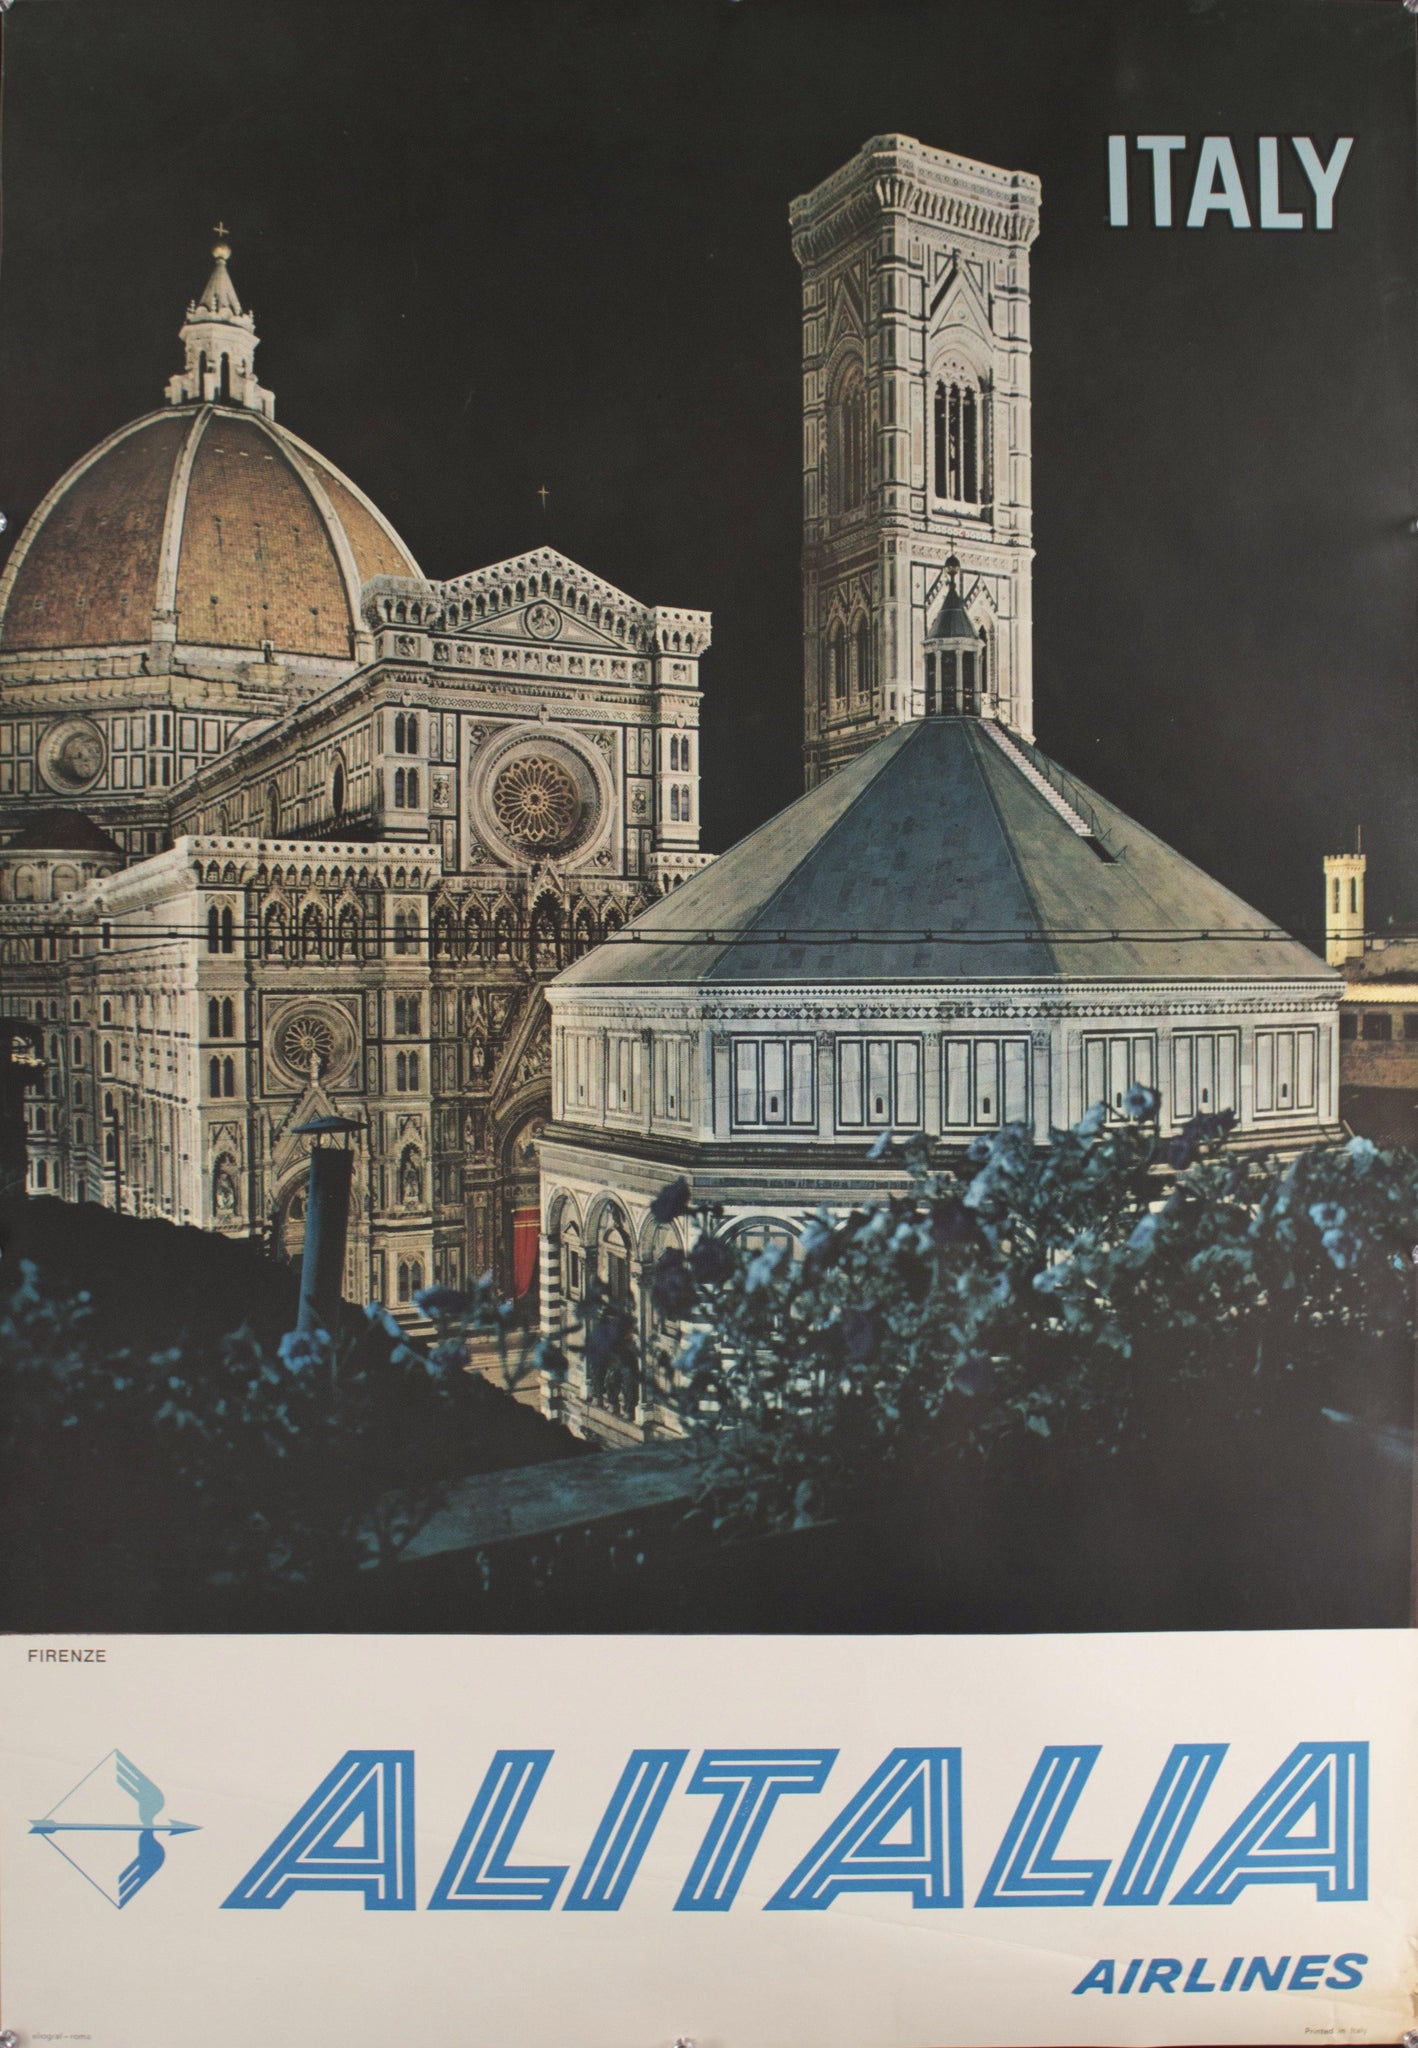 Alitalia Airlines | Italy | Firenze - Golden Age Posters